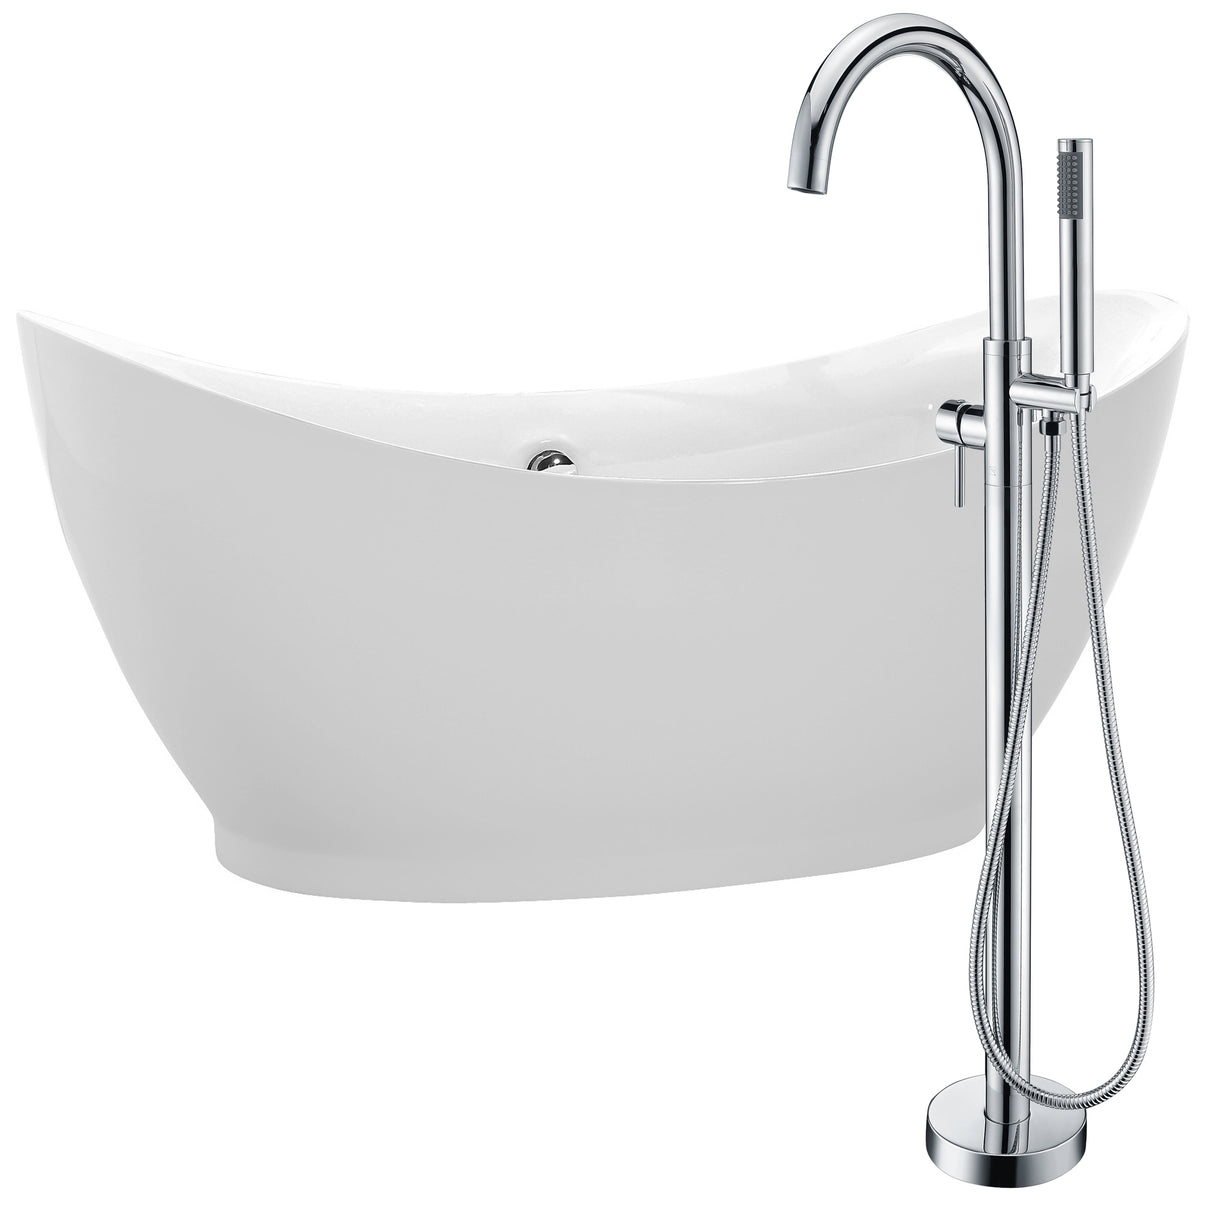 ANZZI FTAZ091-0025C Reginald 68 in. Acrylic Soaking Bathtub in White with Kros Faucet in Polished Chrome